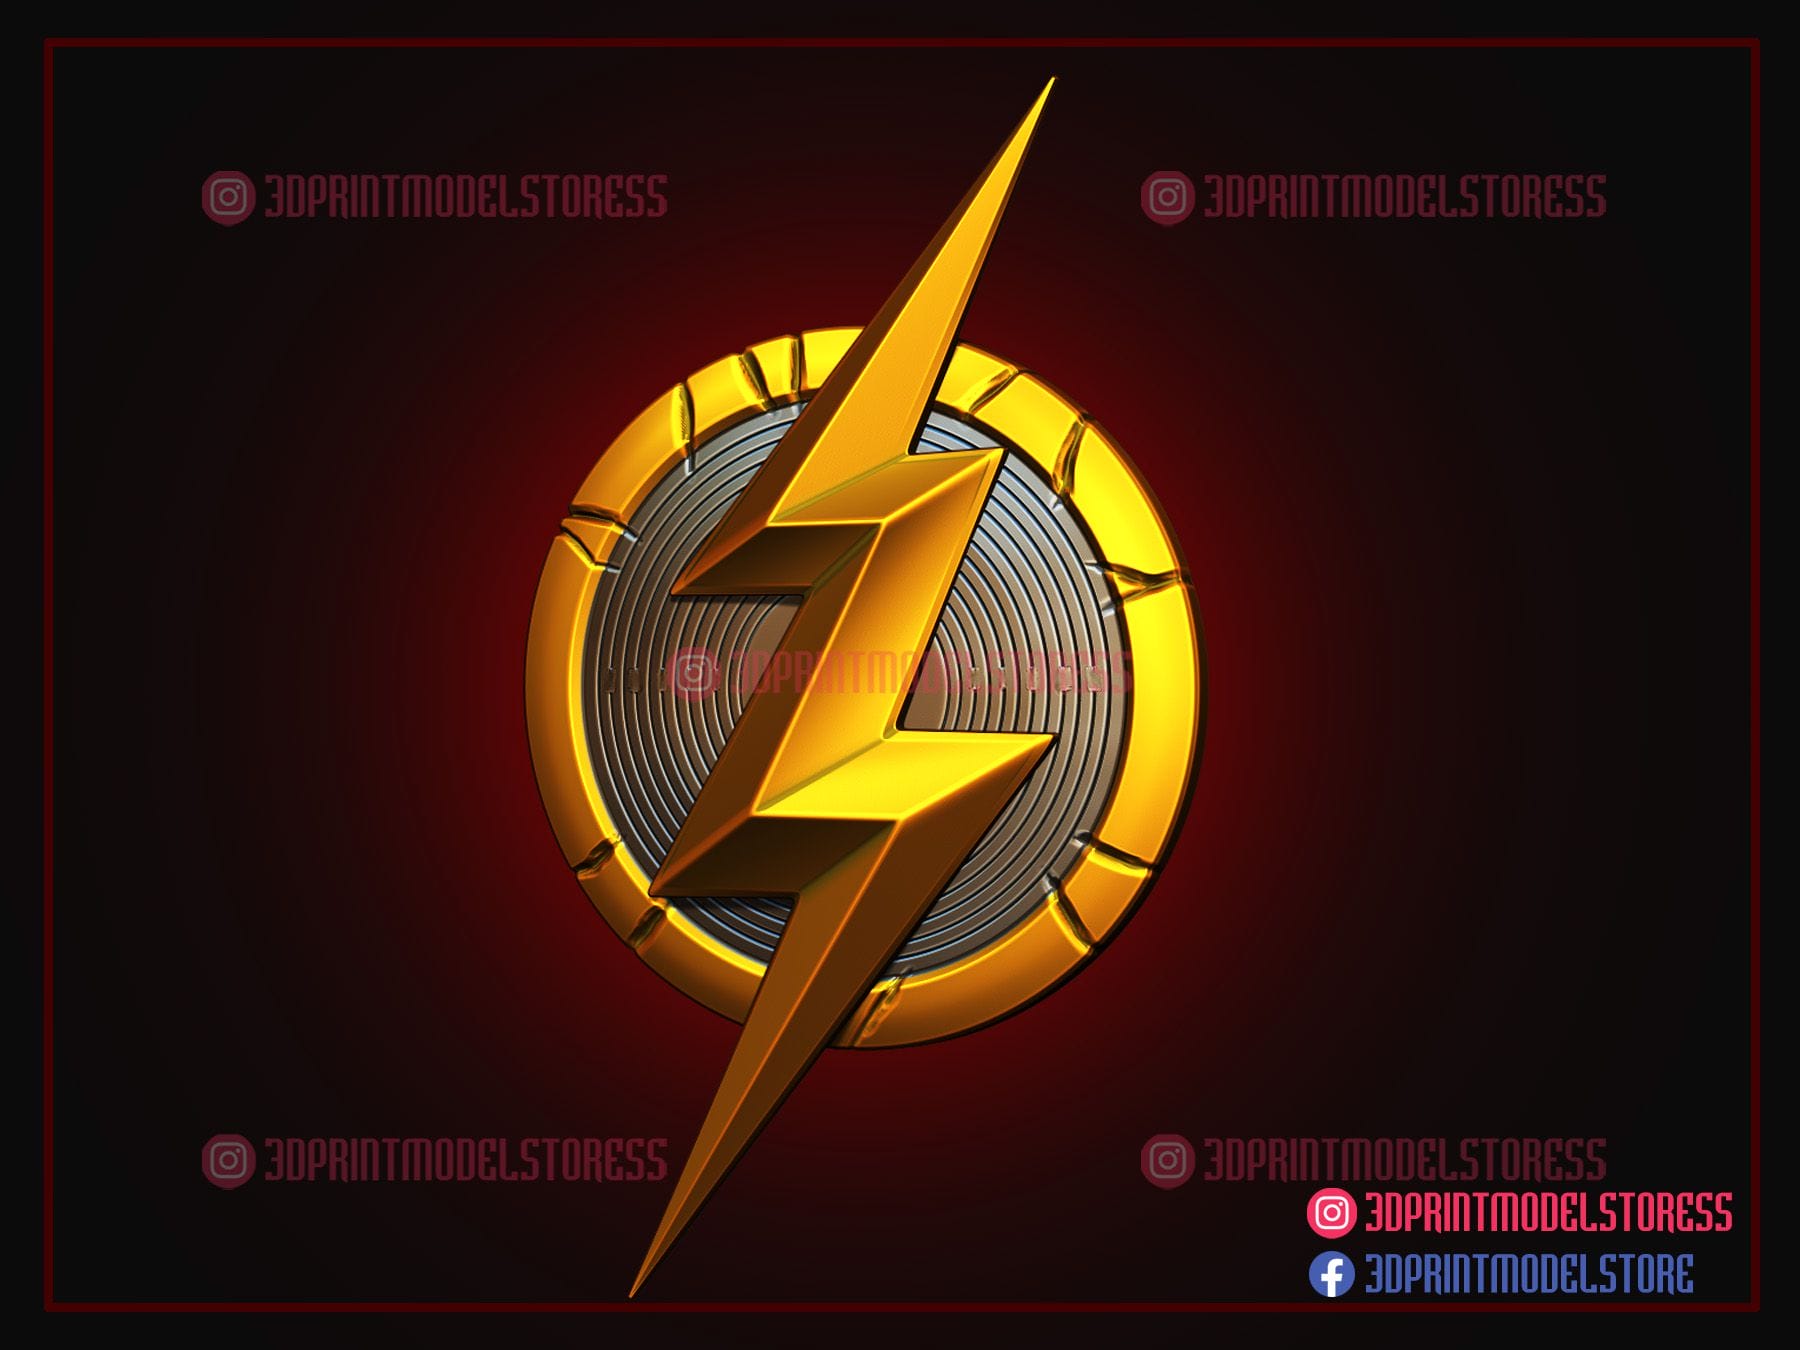 The Flash Logo by MachSabre on DeviantArt